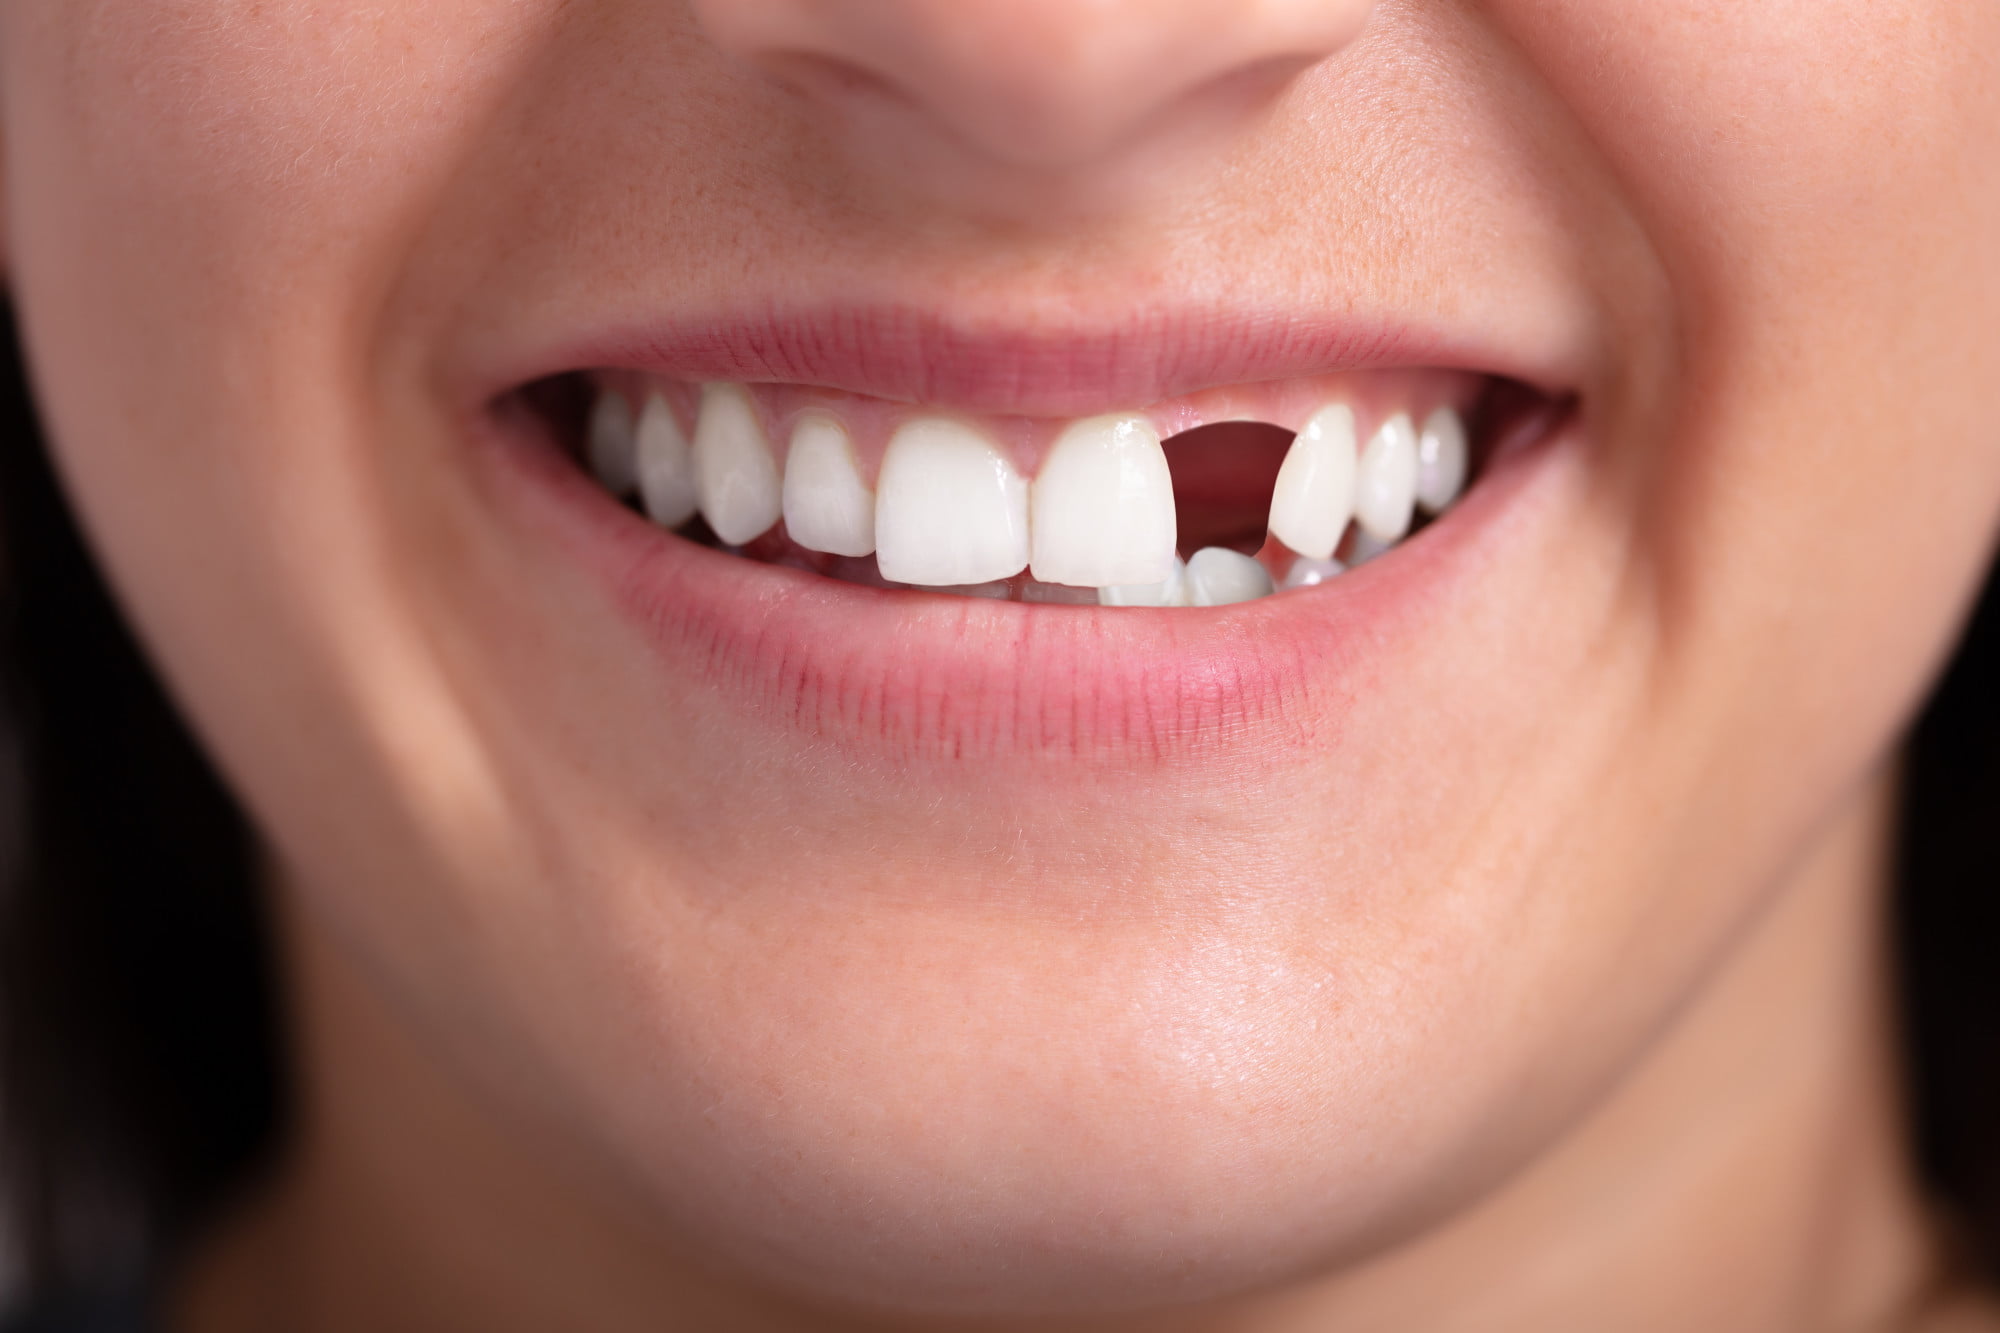 A chipped front tooth can be caused by several different things. Let's take a look at the common causes and treatment options.